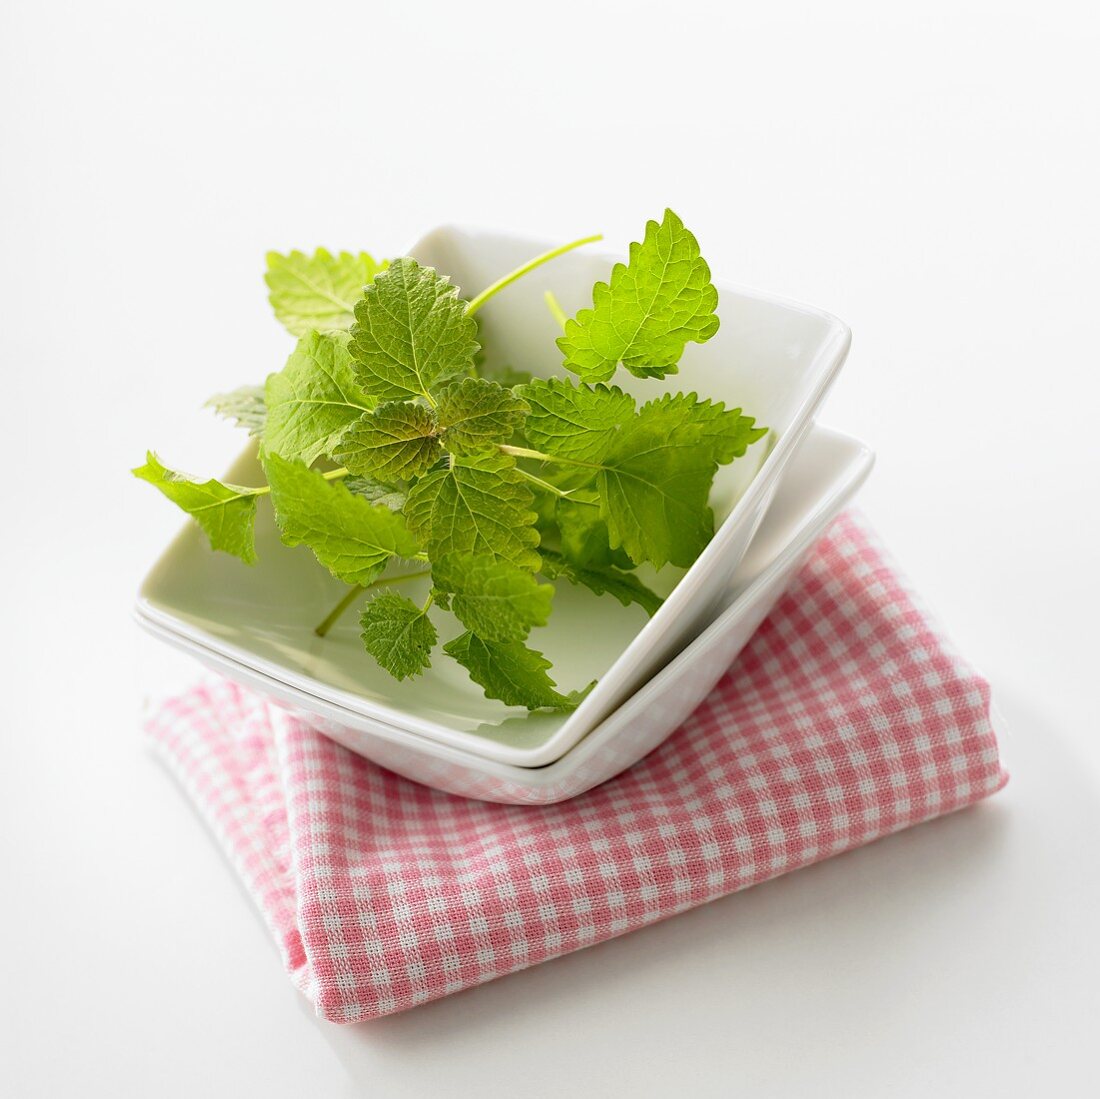 Lemon balm in a small dish on a checked cloth